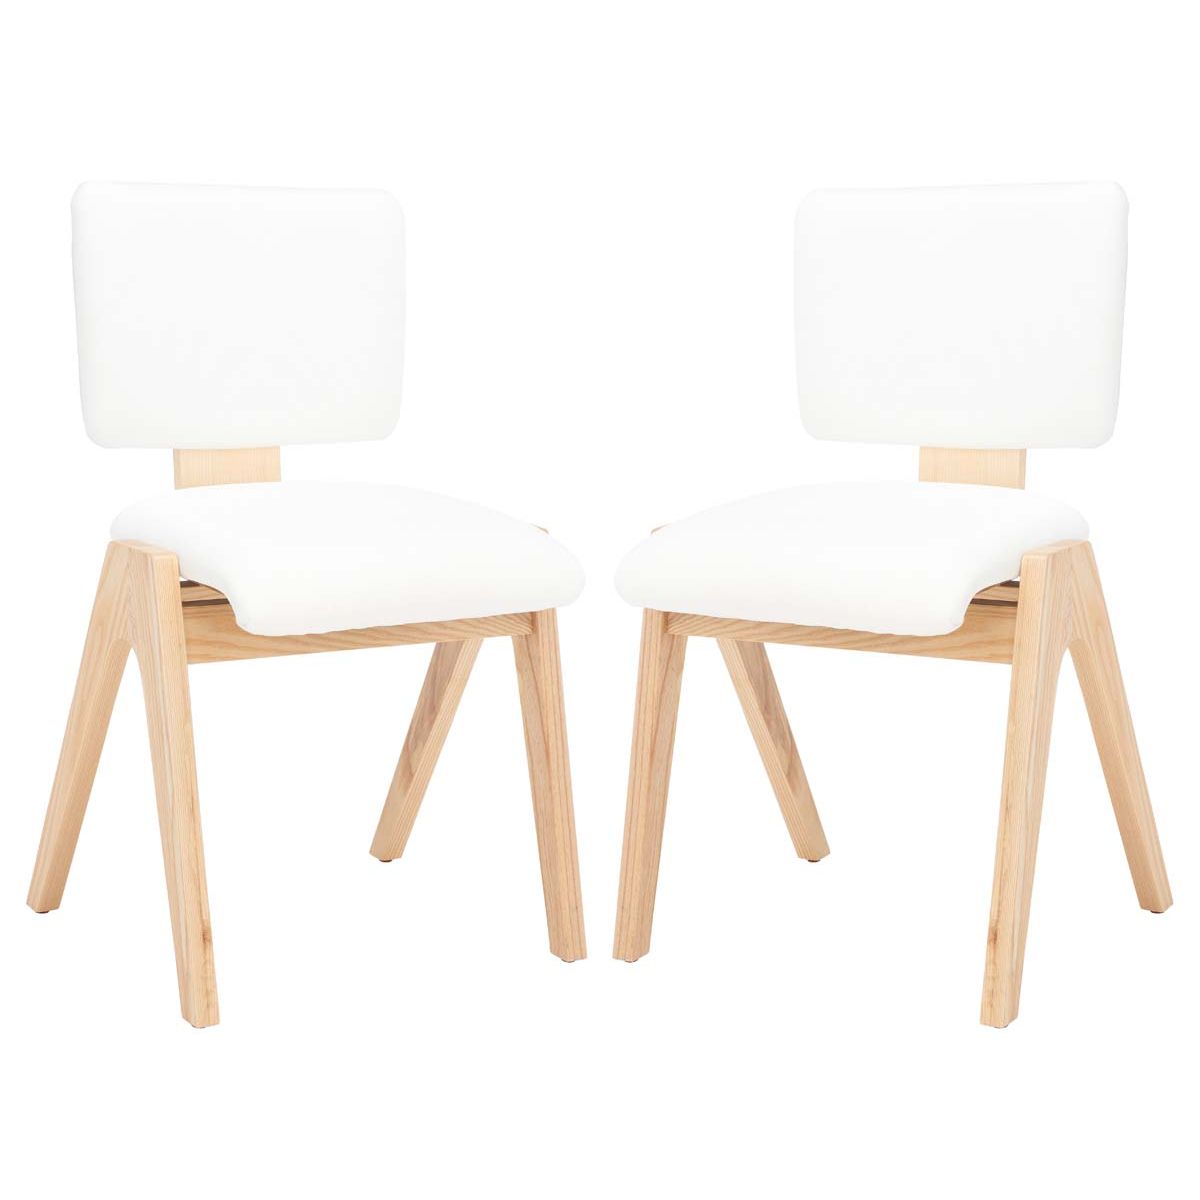 Safavieh Couture Alisyn Wood Dining Chair(Set of 2) , SFV4125